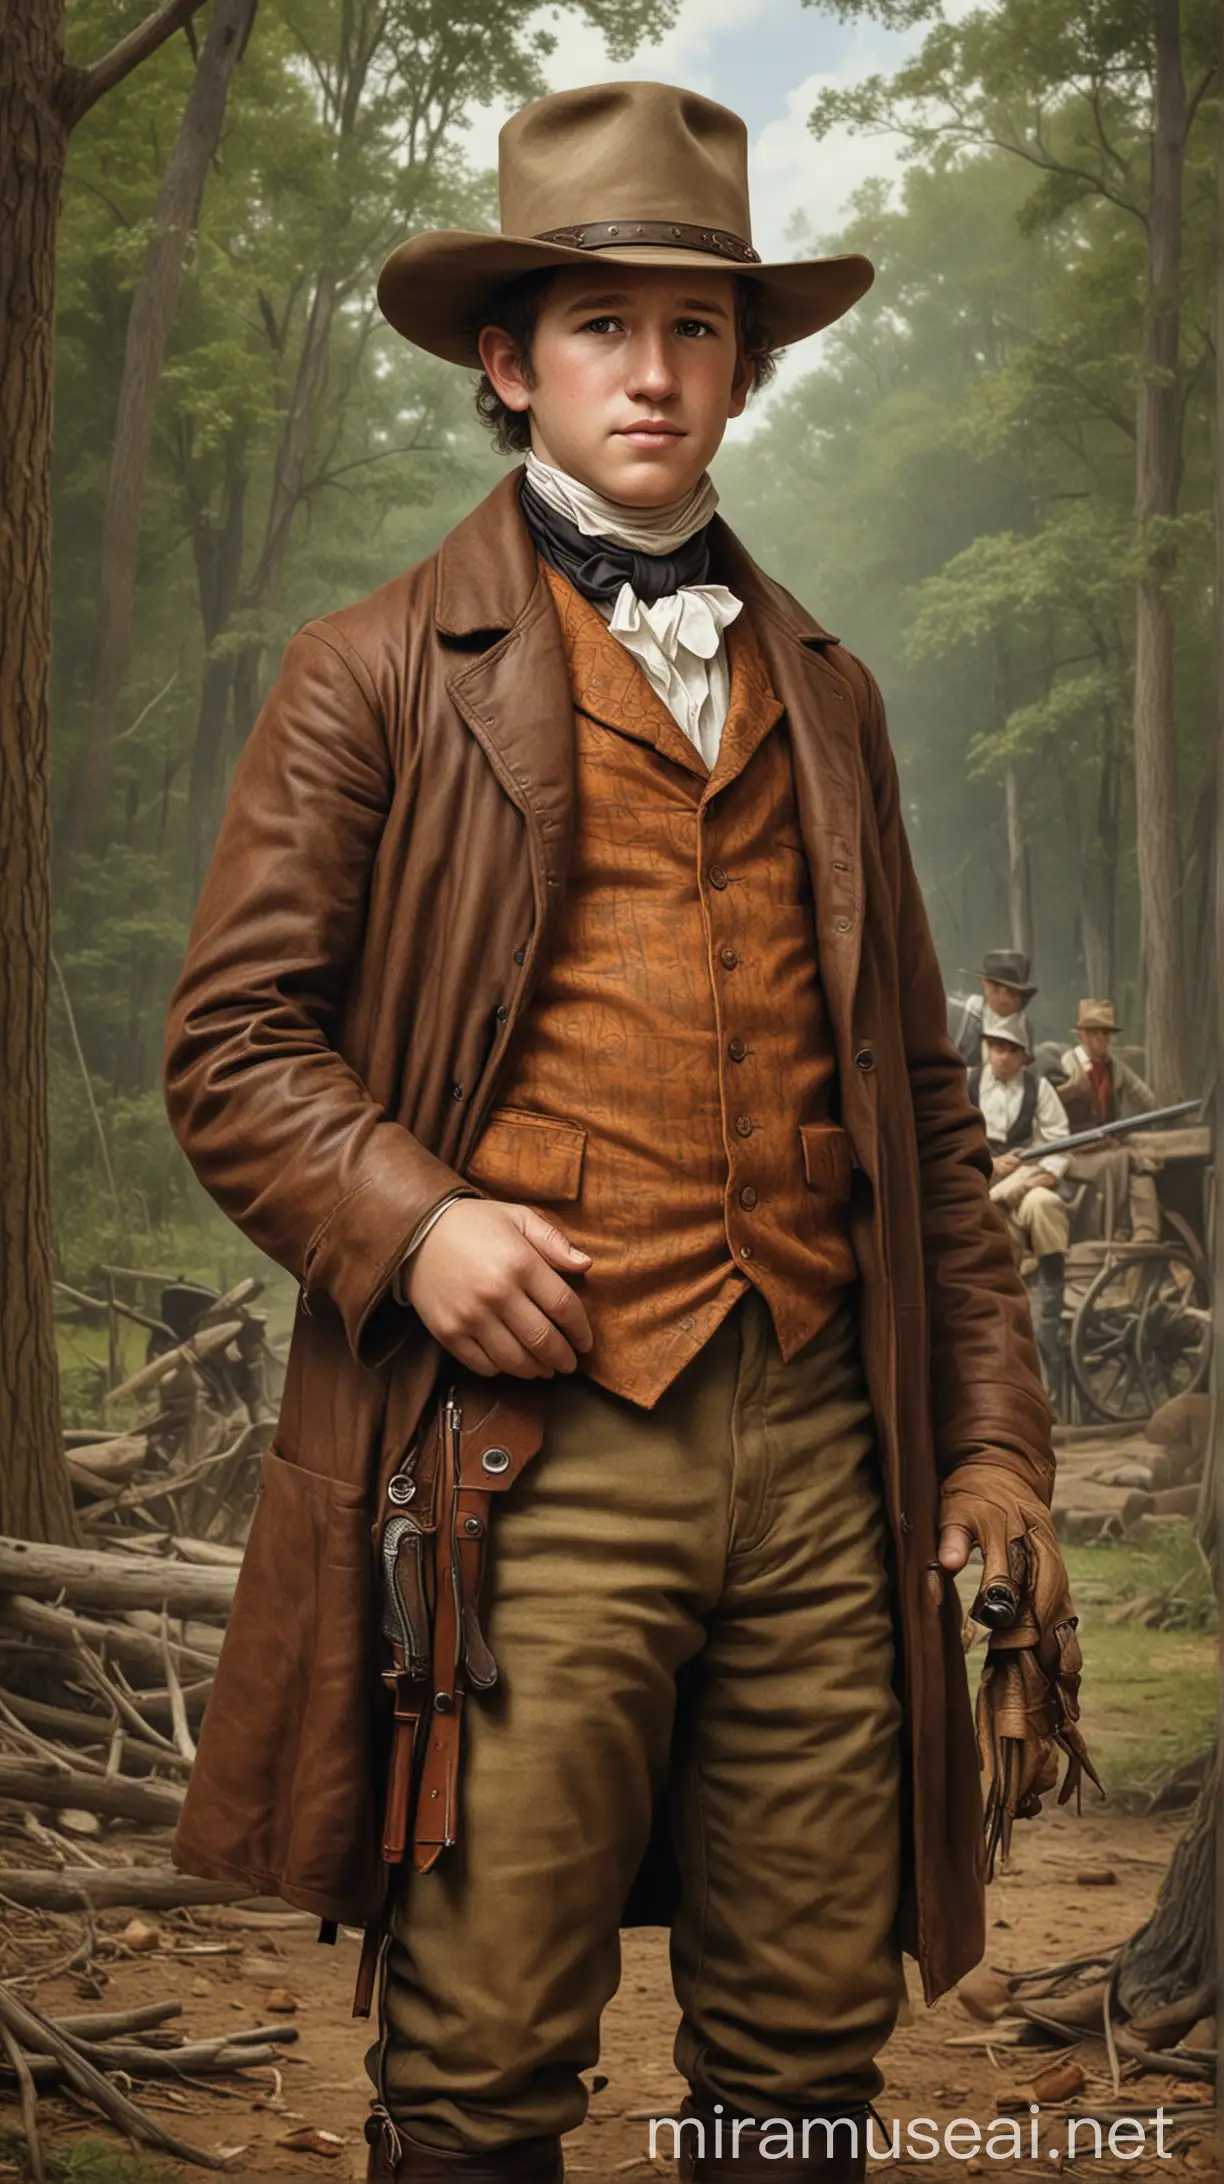 Illustrate a young Sam Houston in Virginia, showcasing his early life and adventurous spirit. hyper realistic